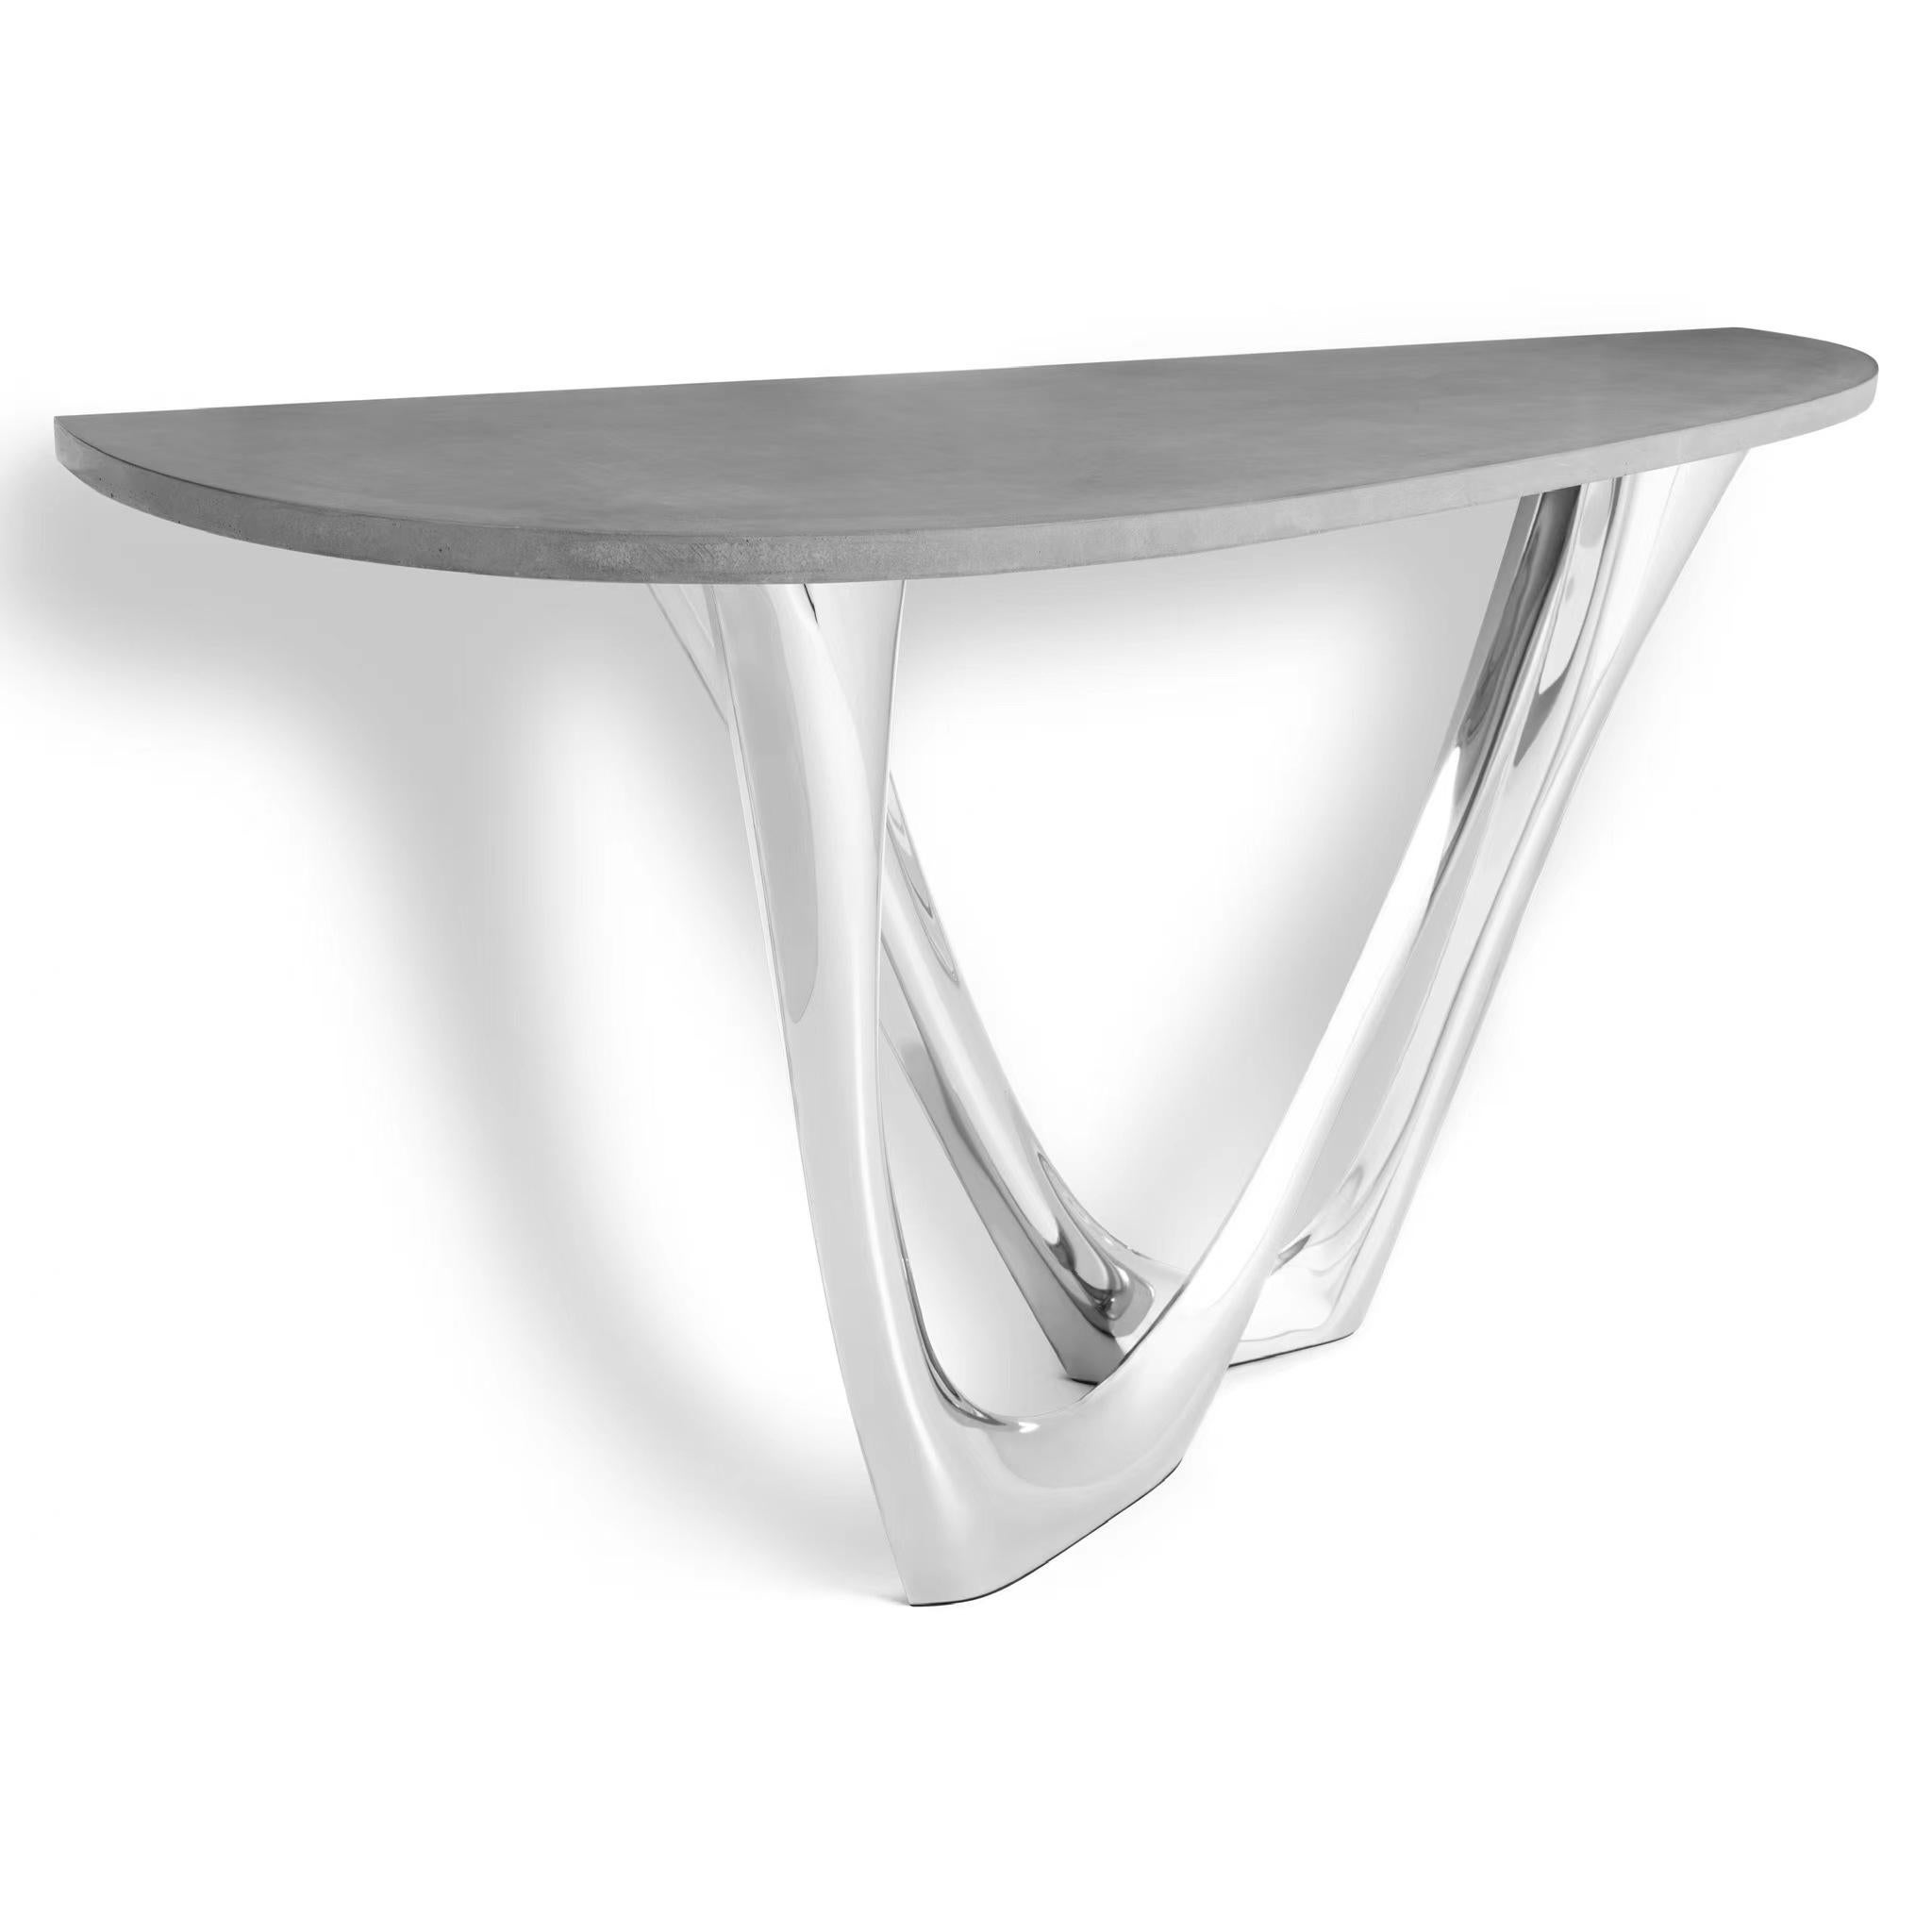 G-Console Duo Concrete Polished Stainless Steel Side Table by Zieta In New Condition For Sale In Beverly Hills, CA